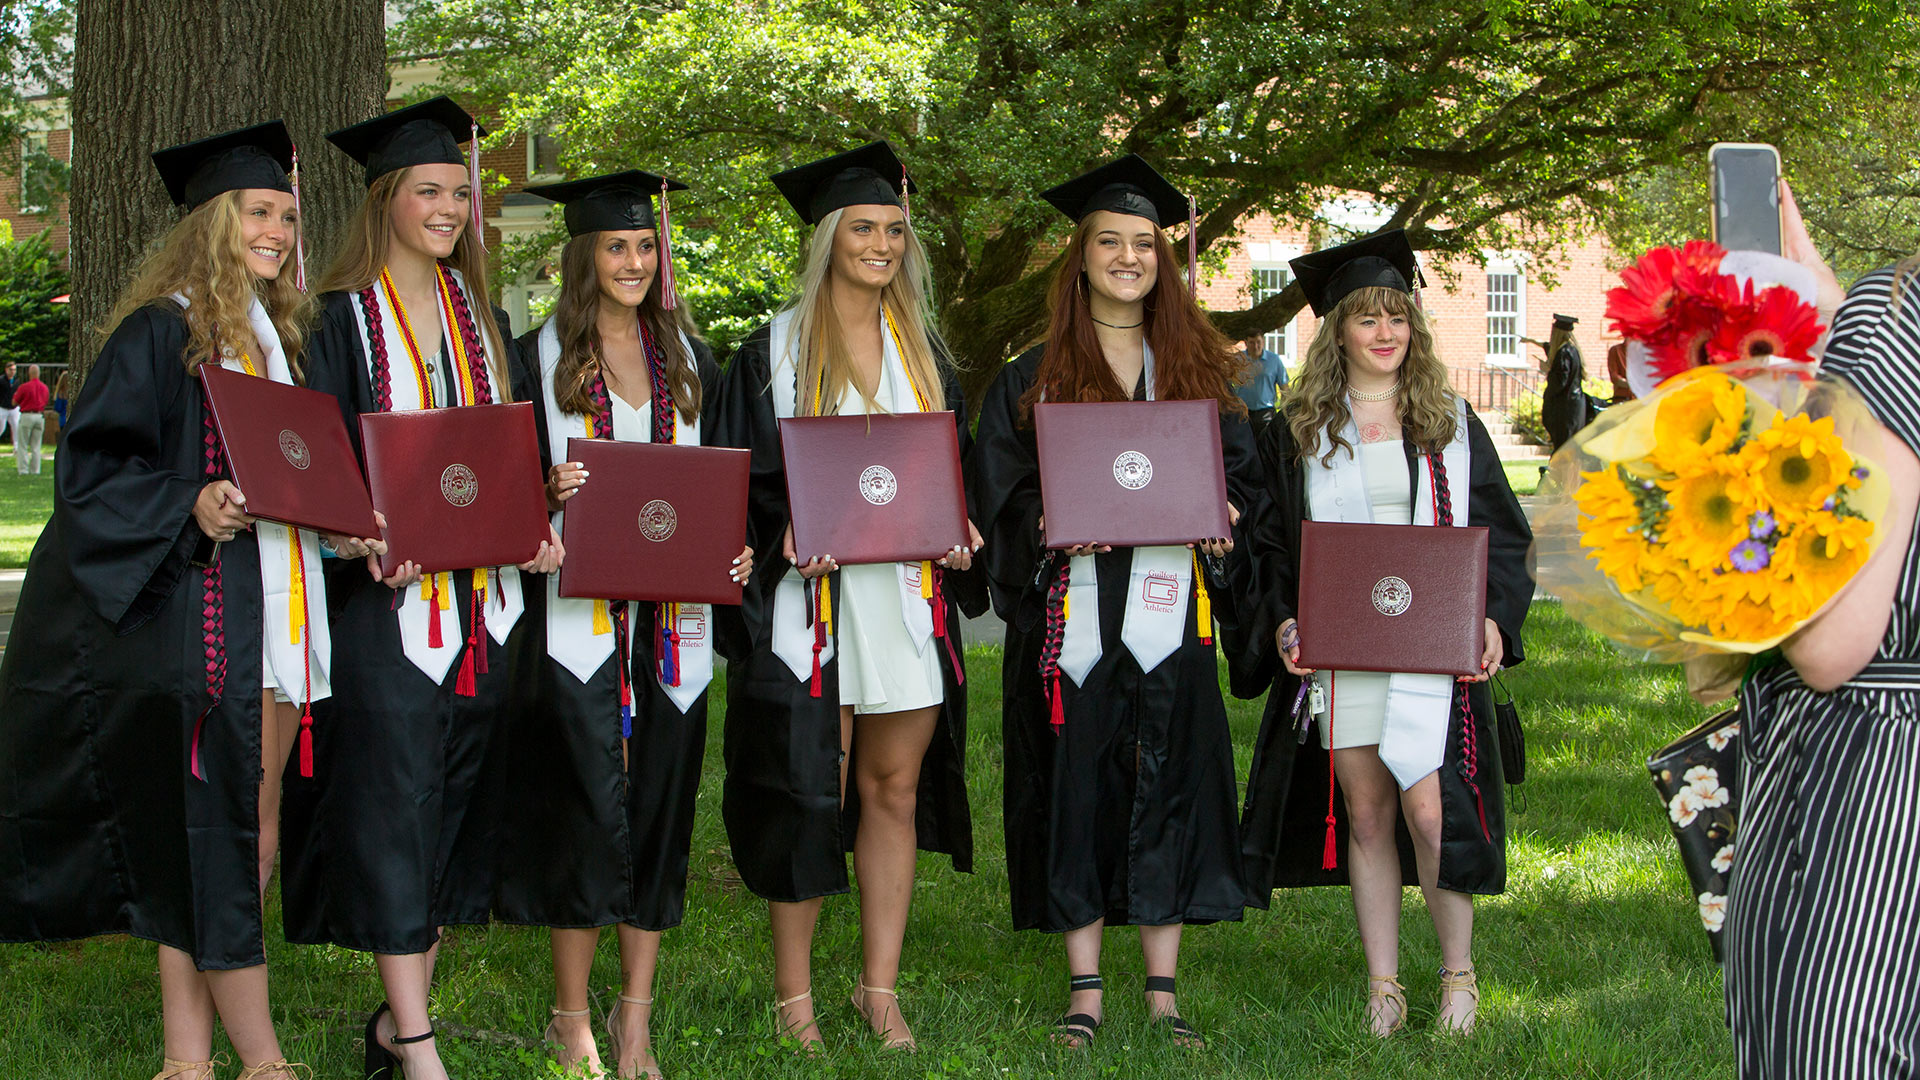 A group of students pose to take a photo together at Commencement.